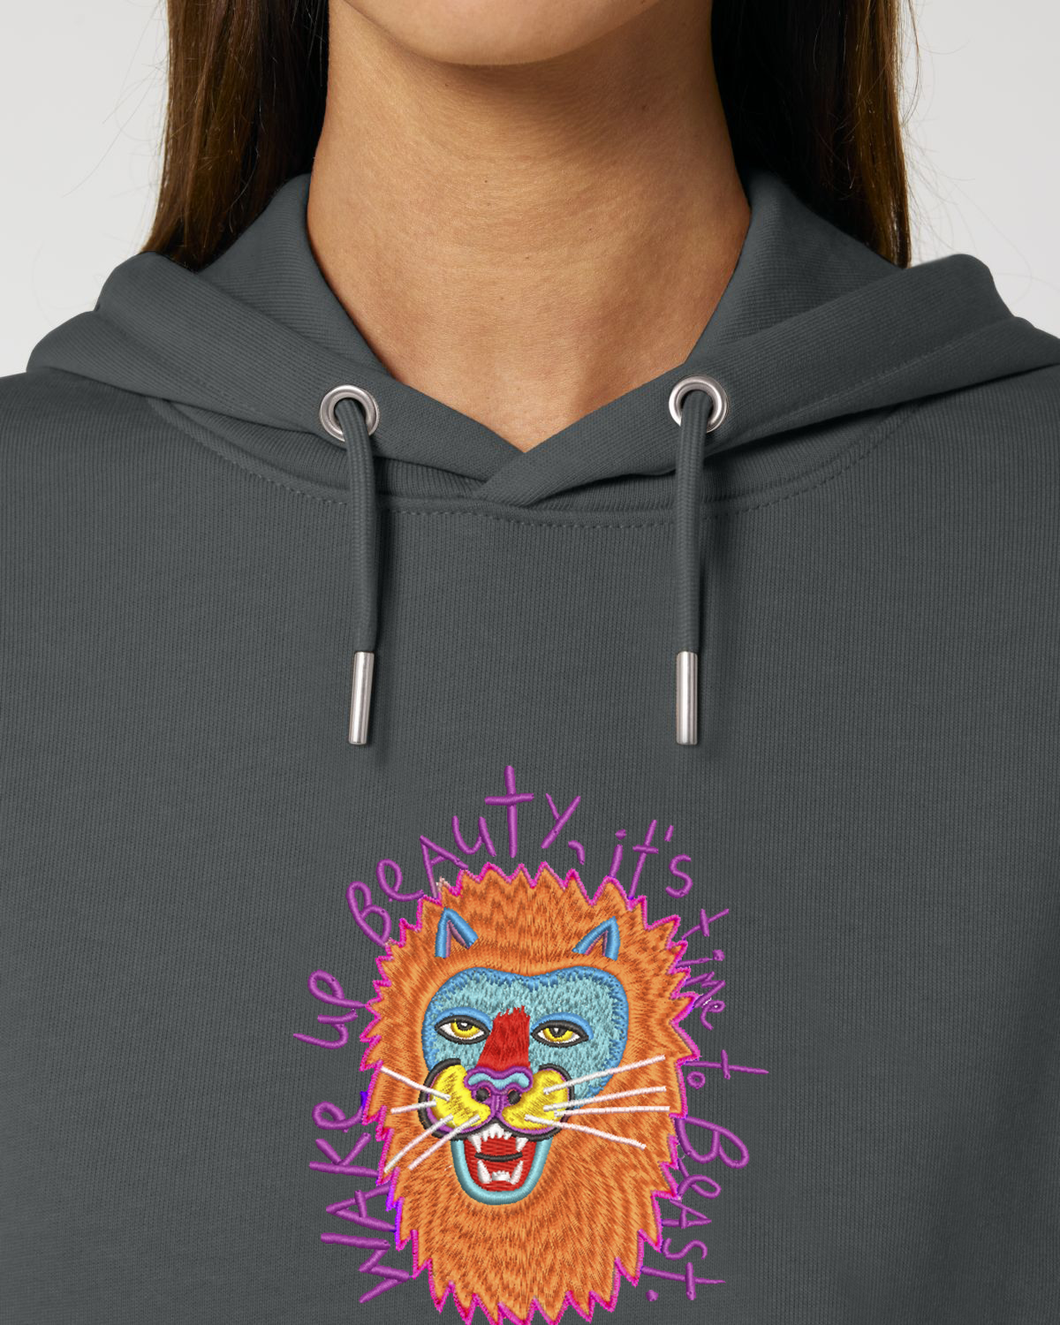 Lion - WAKE UP BEAUTY, IT'S TIME TO BEAST. - Embroidered UNISEX hoodie